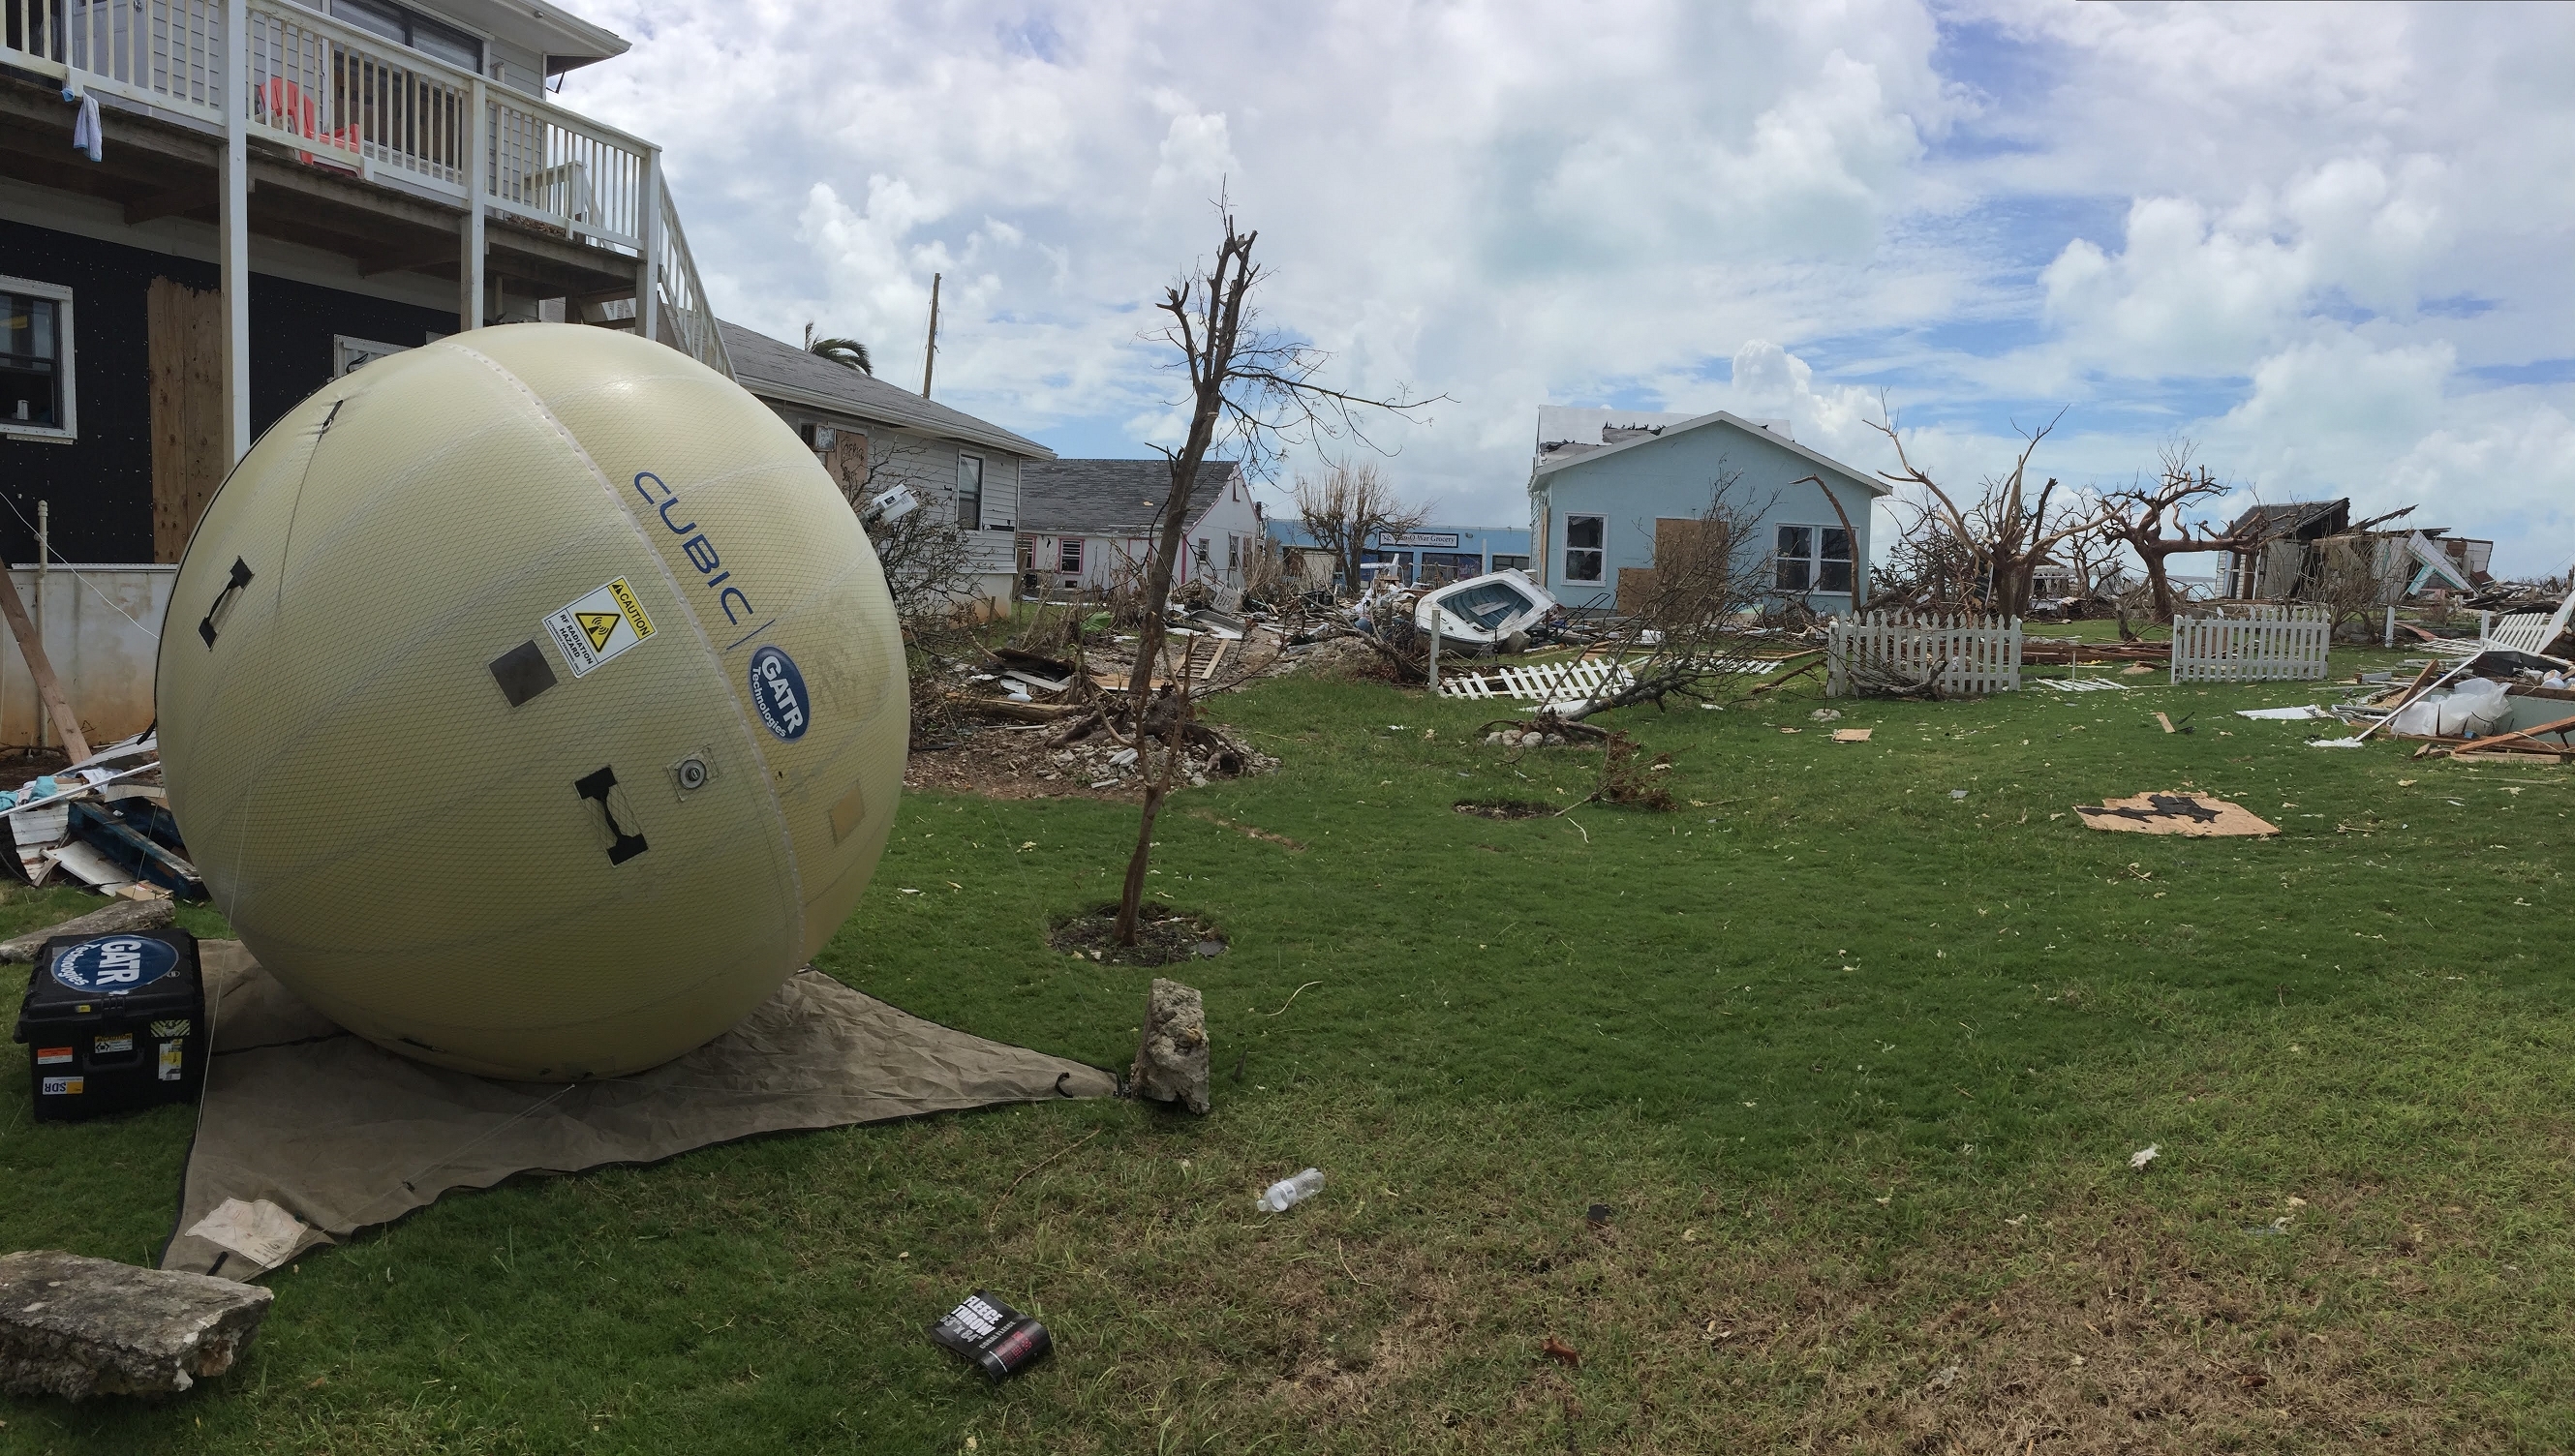 Cubic’s GATR antenna system was used as part of its disaster relief efforts in the Bahamas.(Photo: Business Wire)